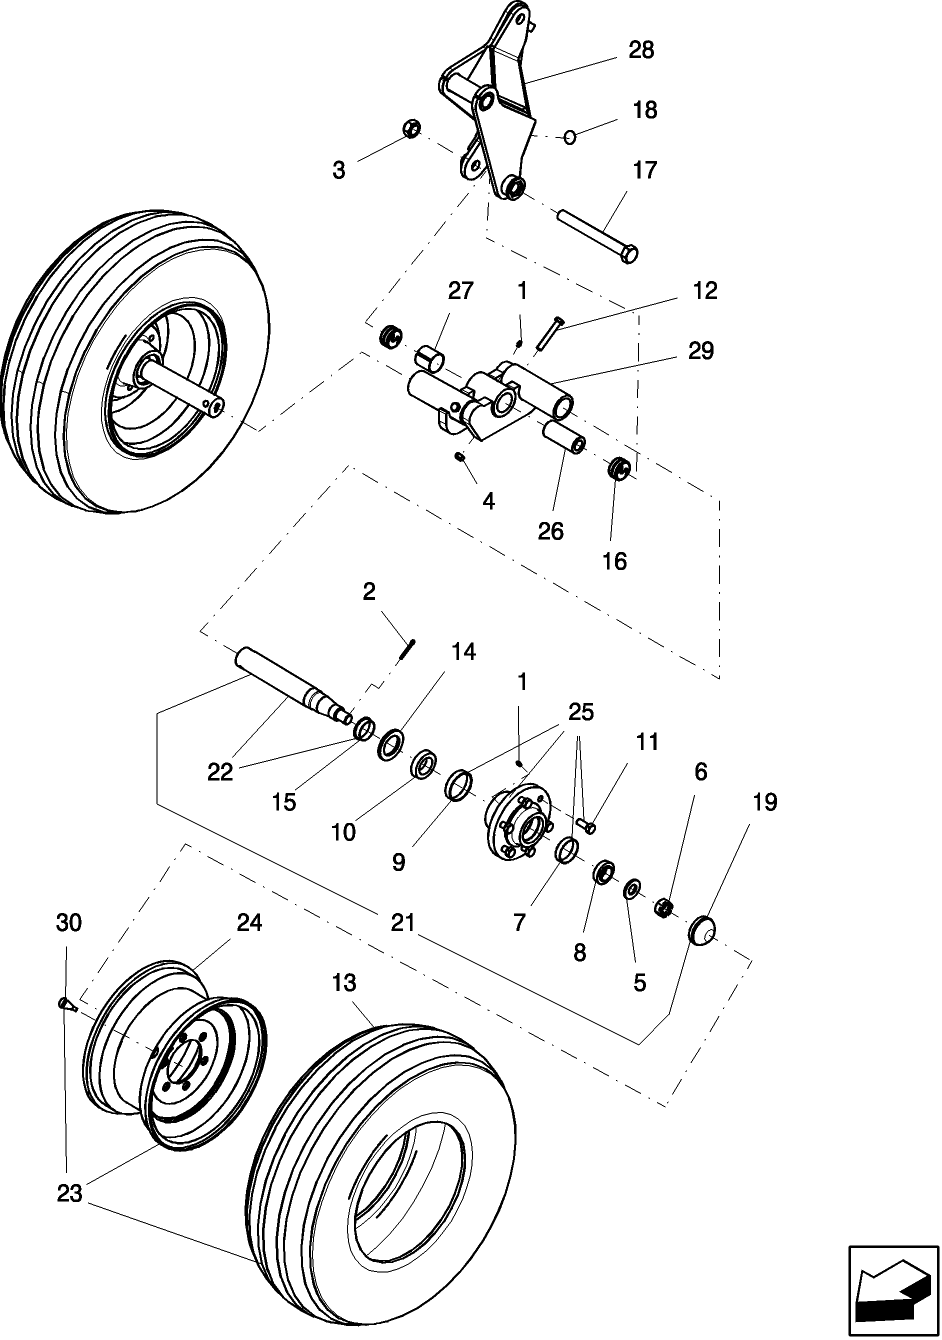 1.060.1 REAR WALKBEAM, 6 BOLT HUB AND SPINDLE, CENTER SECTION